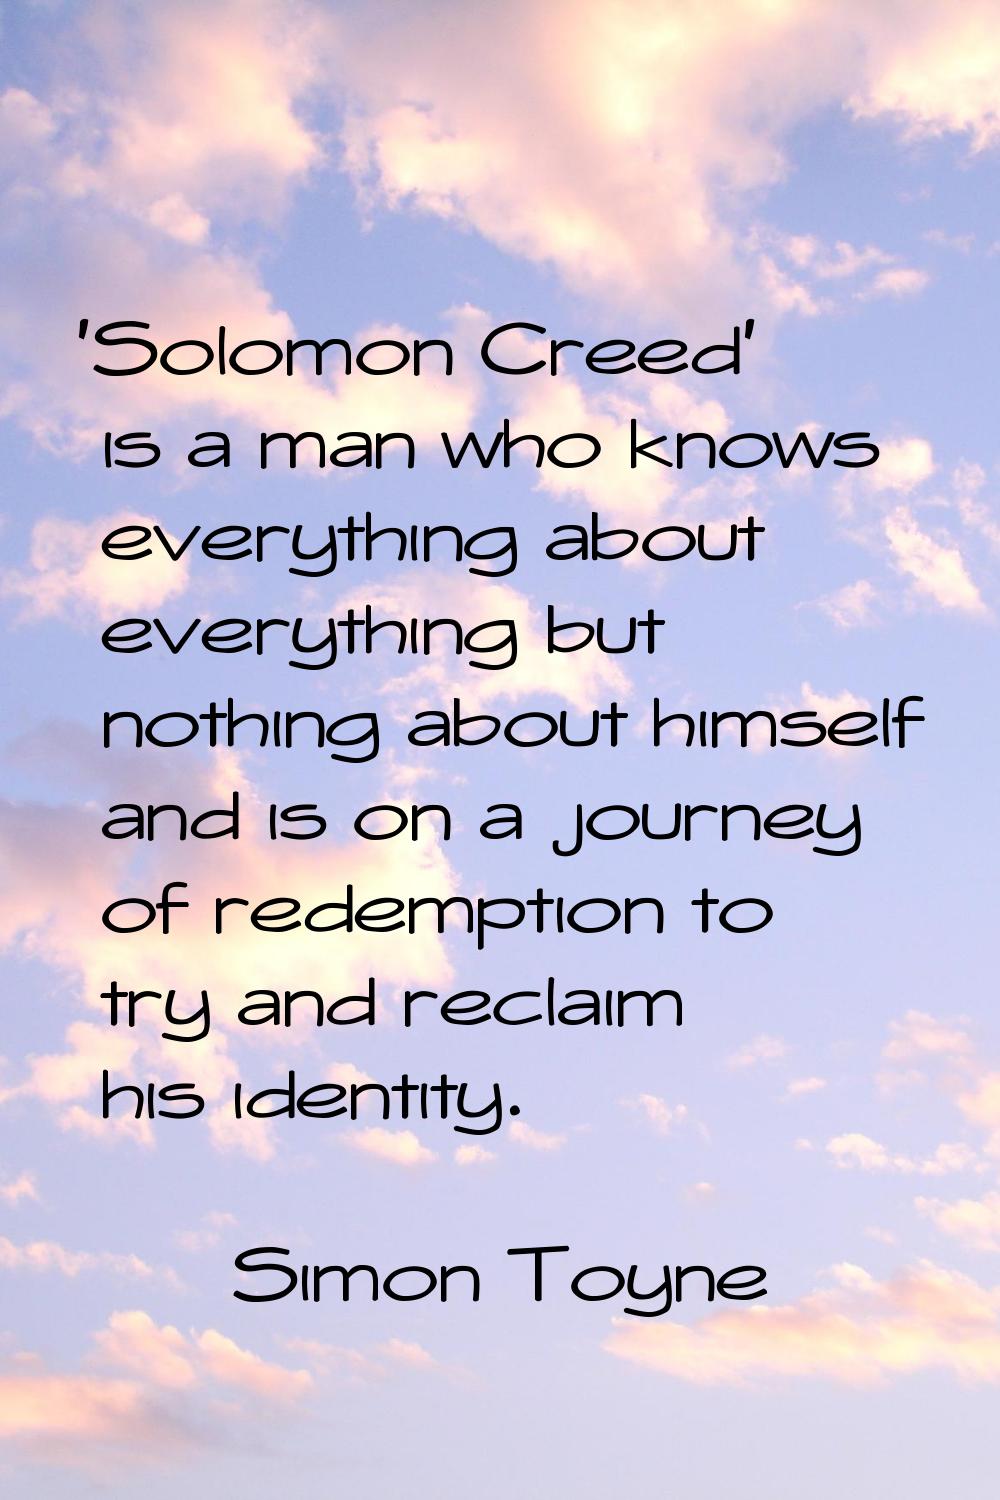 'Solomon Creed' is a man who knows everything about everything but nothing about himself and is on 